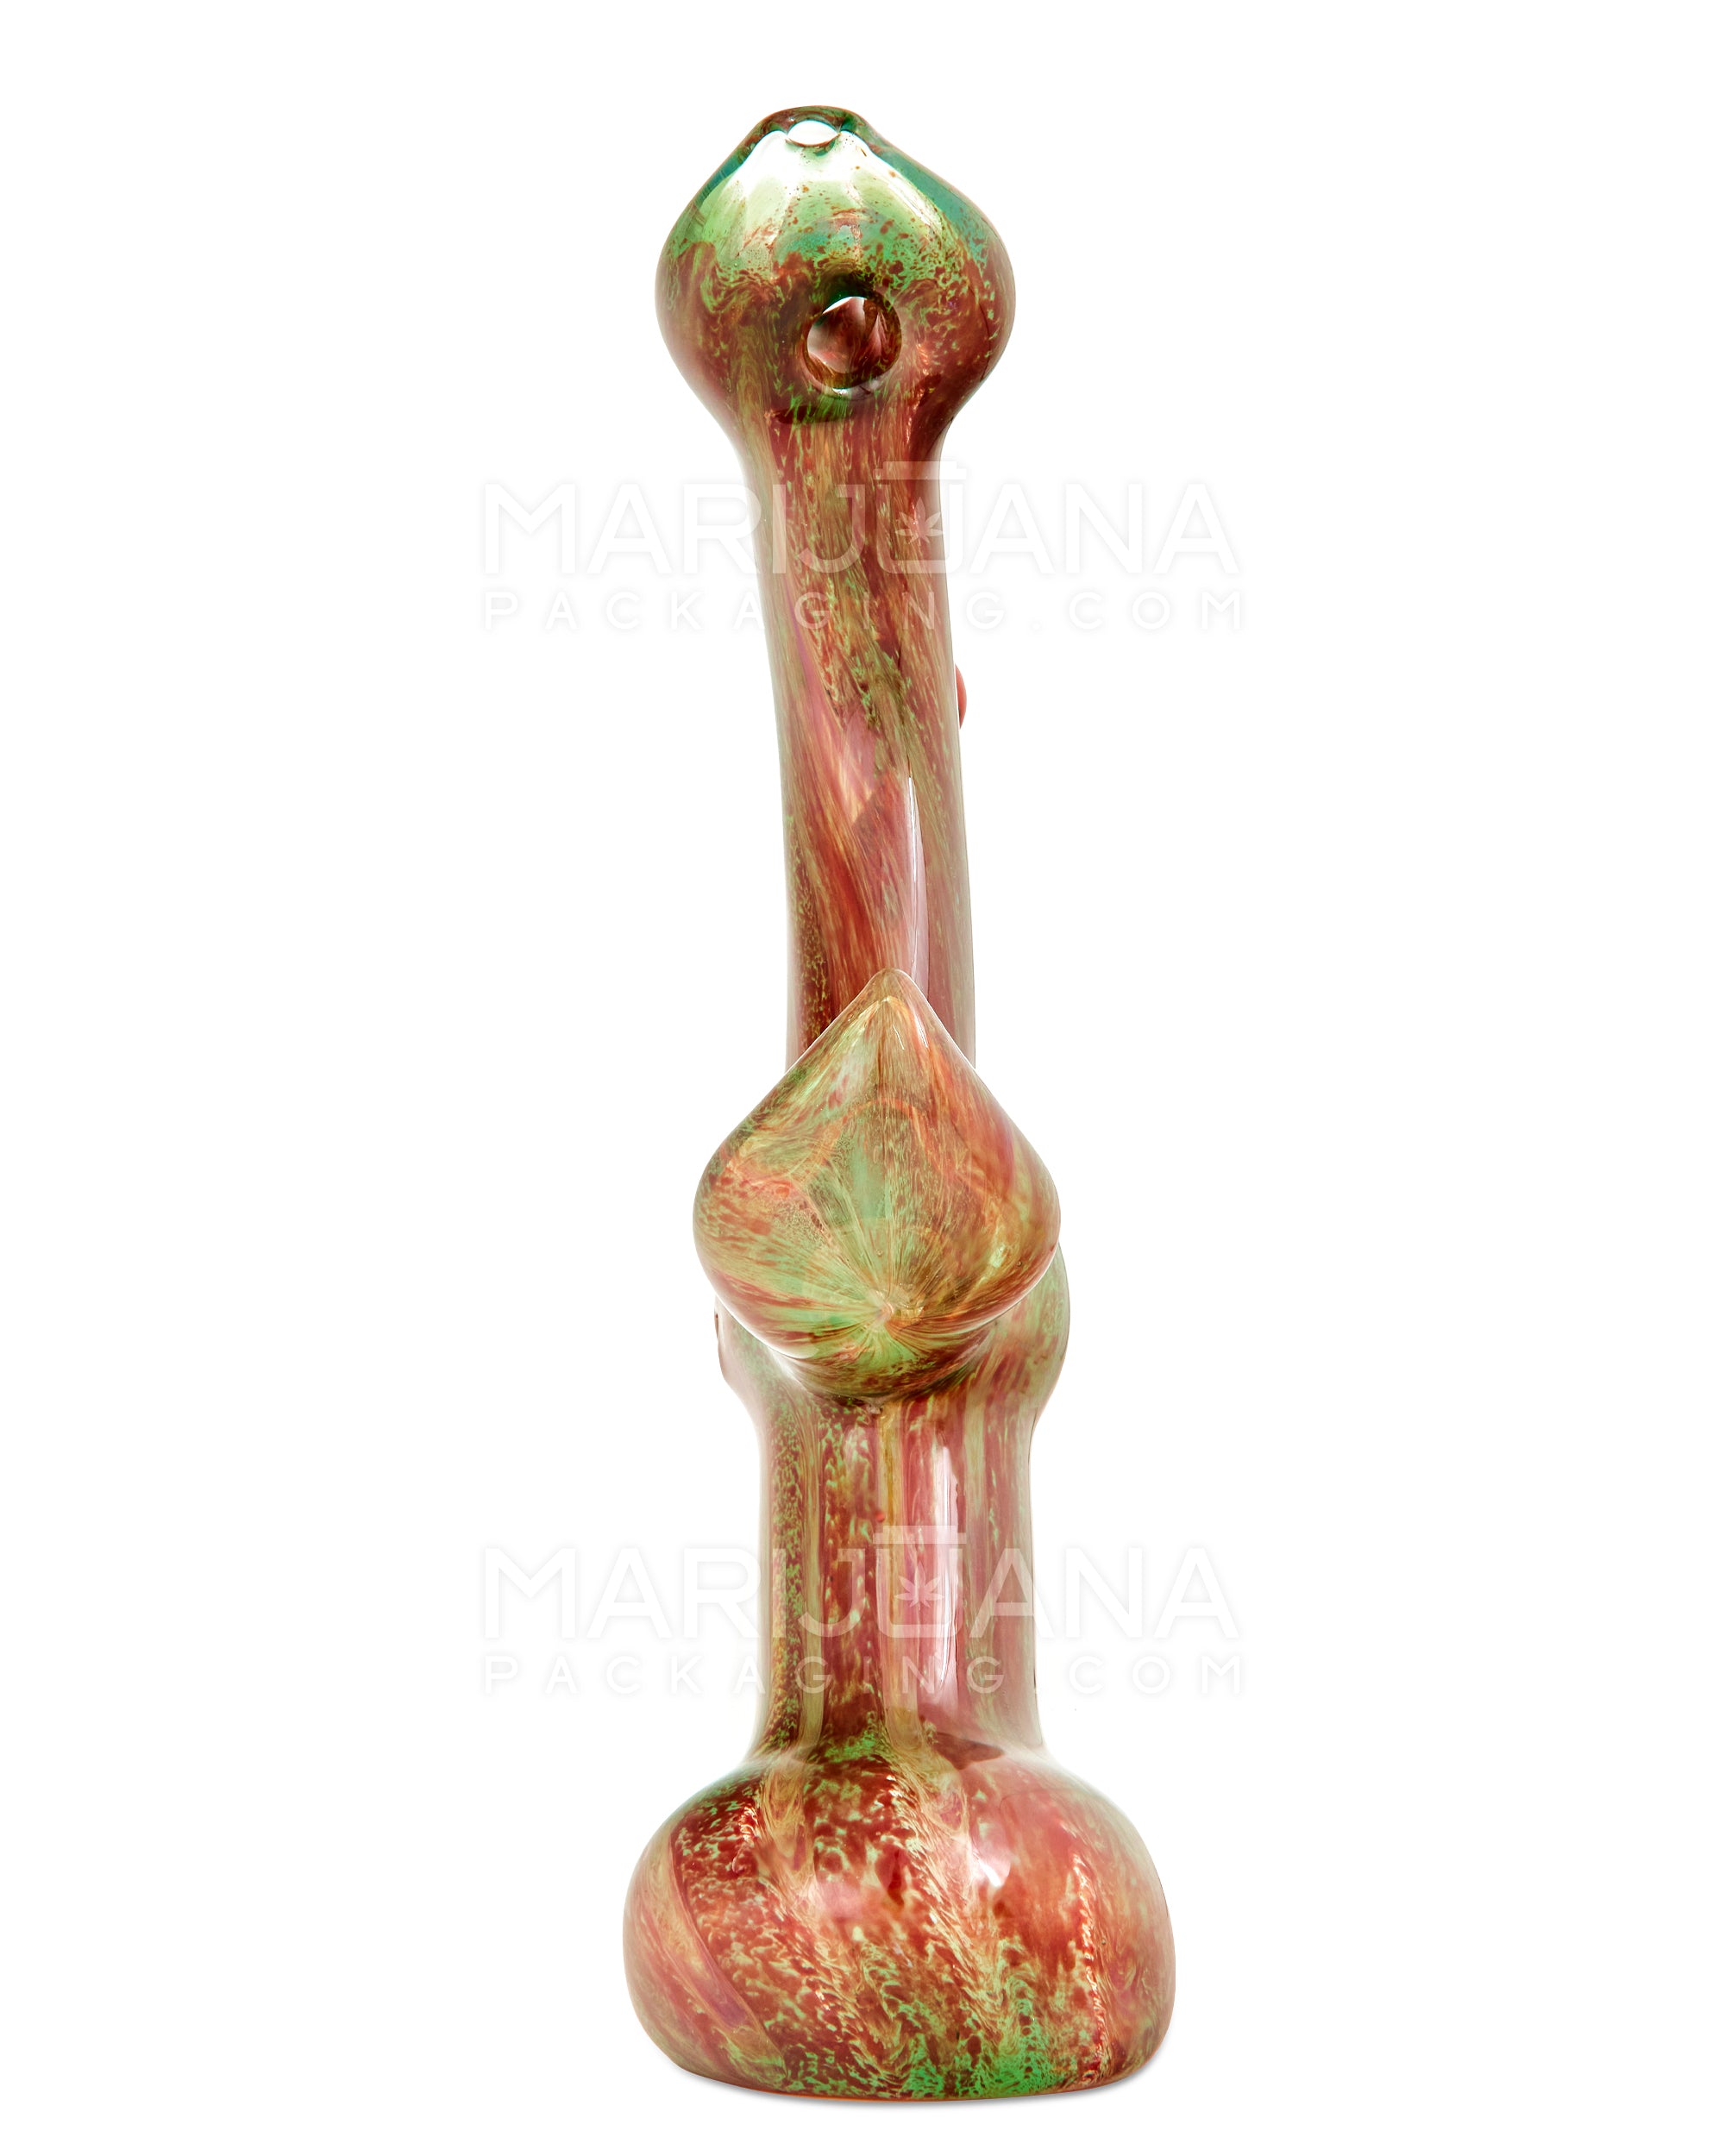 Heady | Donut Mouth Color Pull Kraken Bubbler w/ Triple Tentacles | 9in Tall - Glass - Red & Green - 4